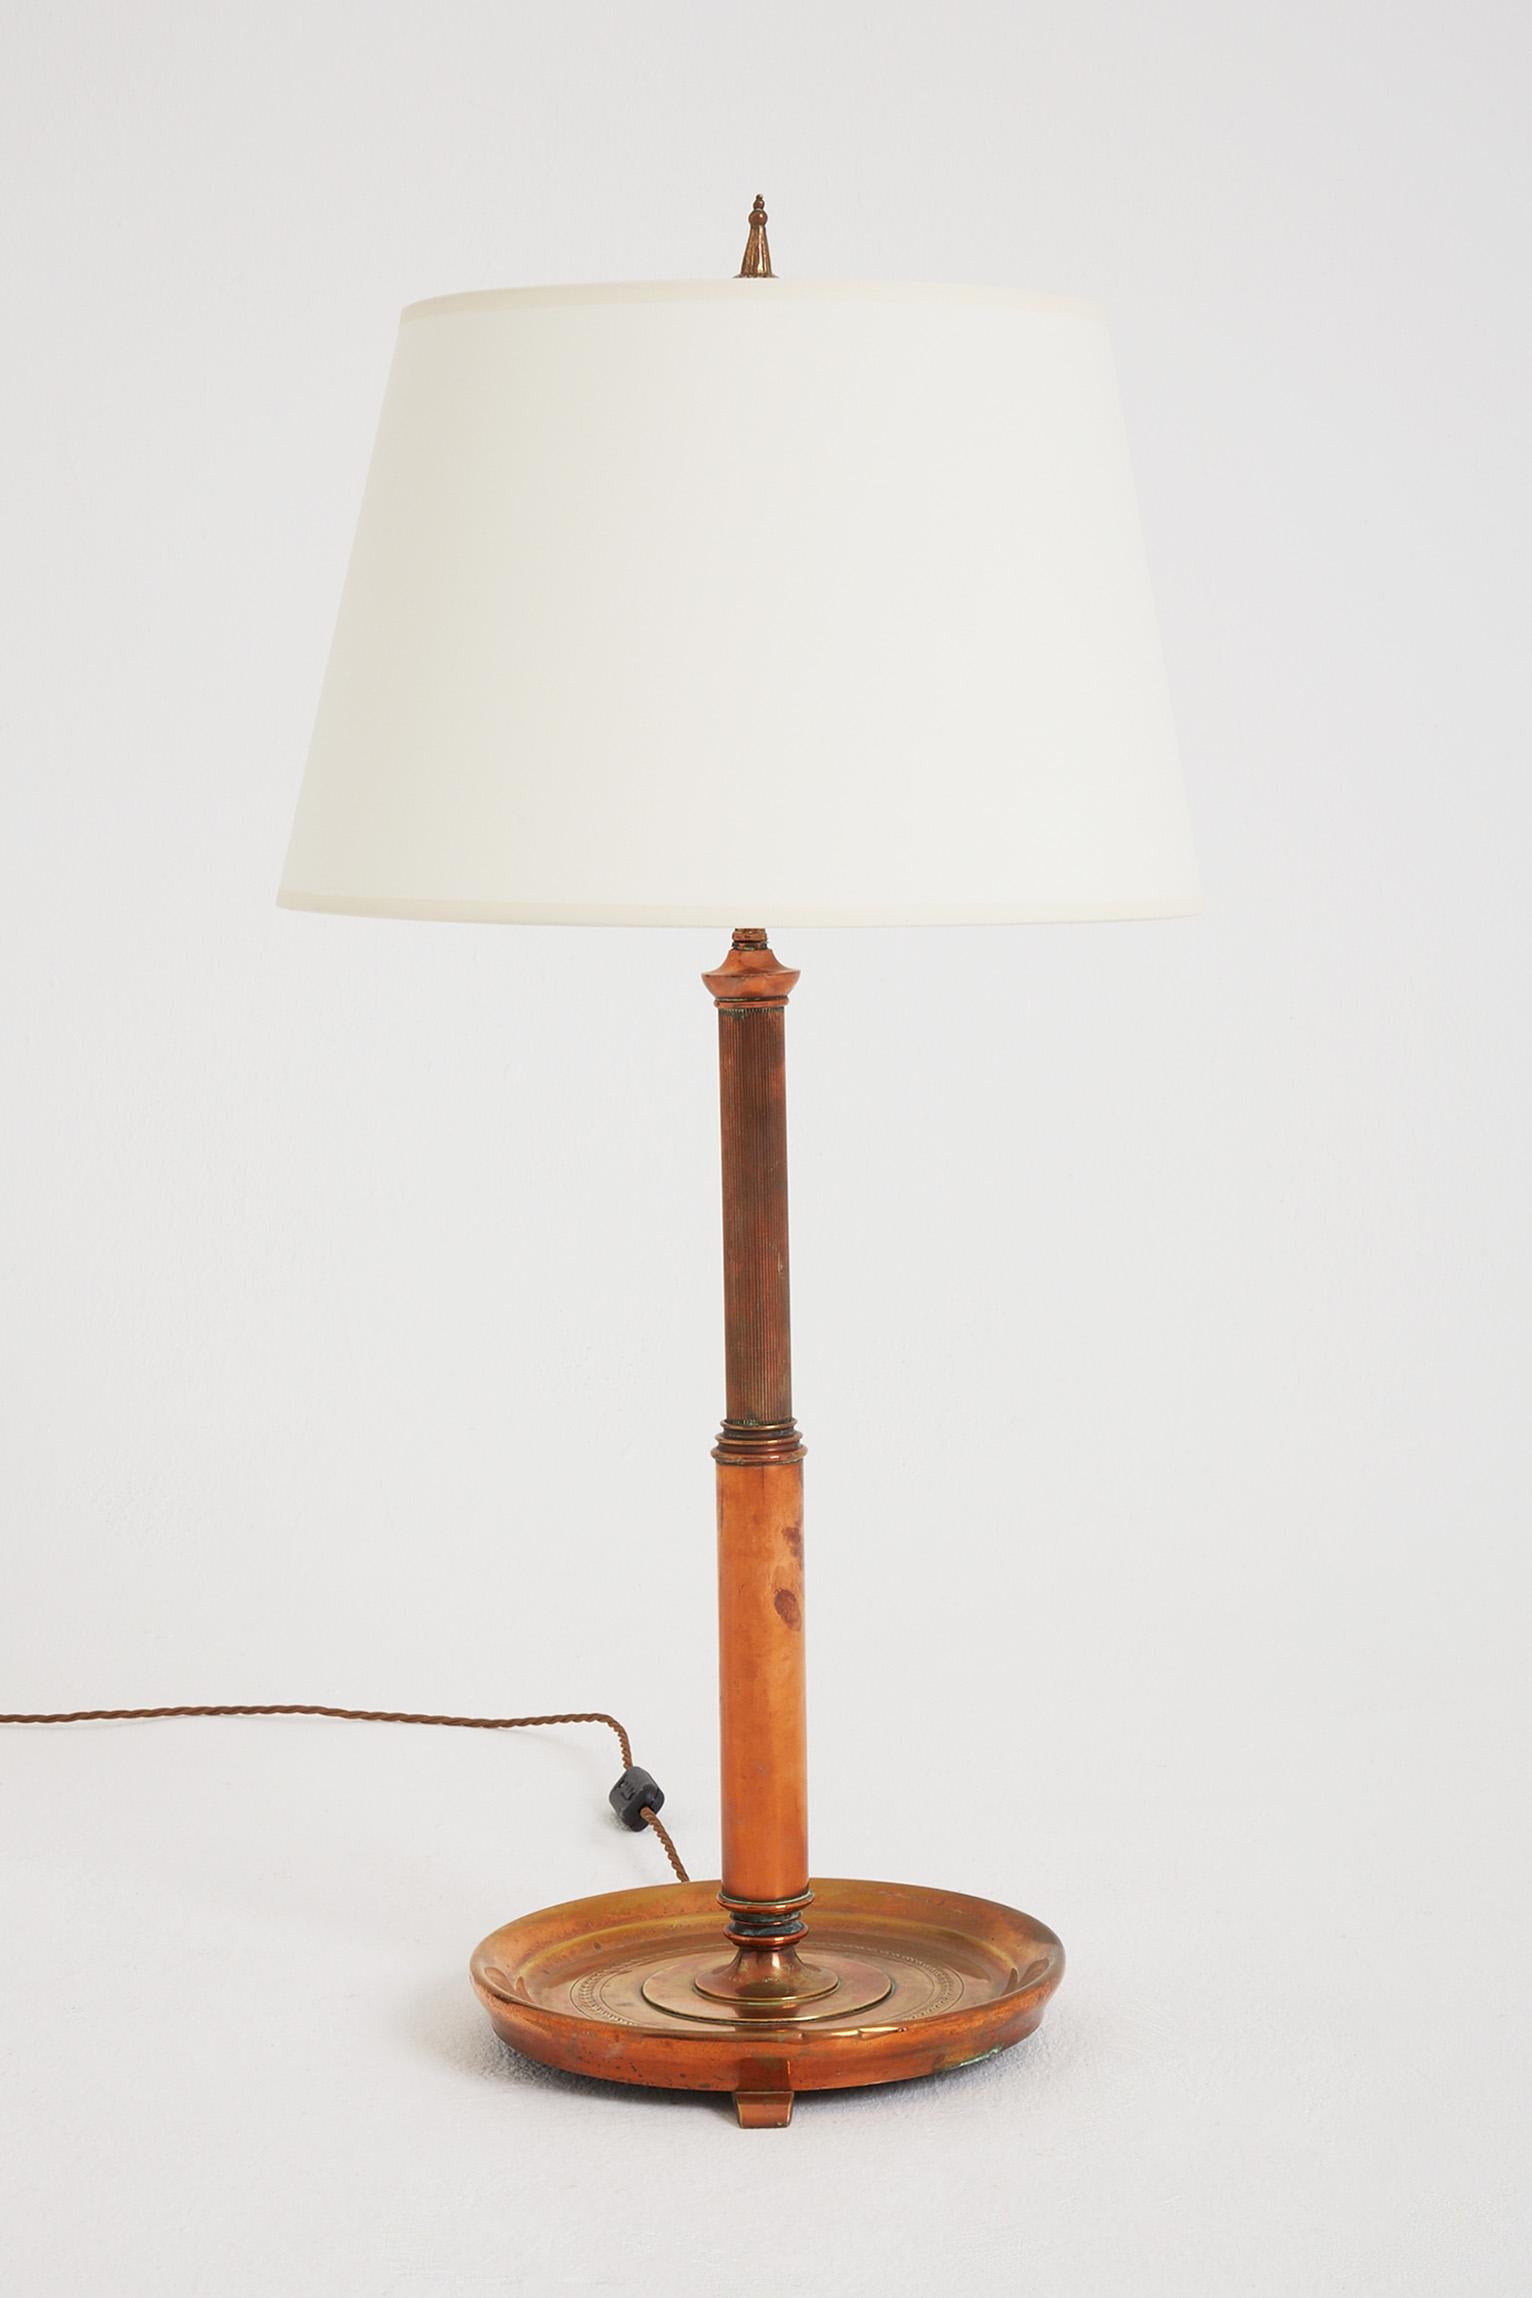 A Neoclassical gilt copper table lamp.
France, circa 1900.
With the shade: 83 cm high by 41 cm high.
Lamp base only: 83 cm high by 27 m diameter.